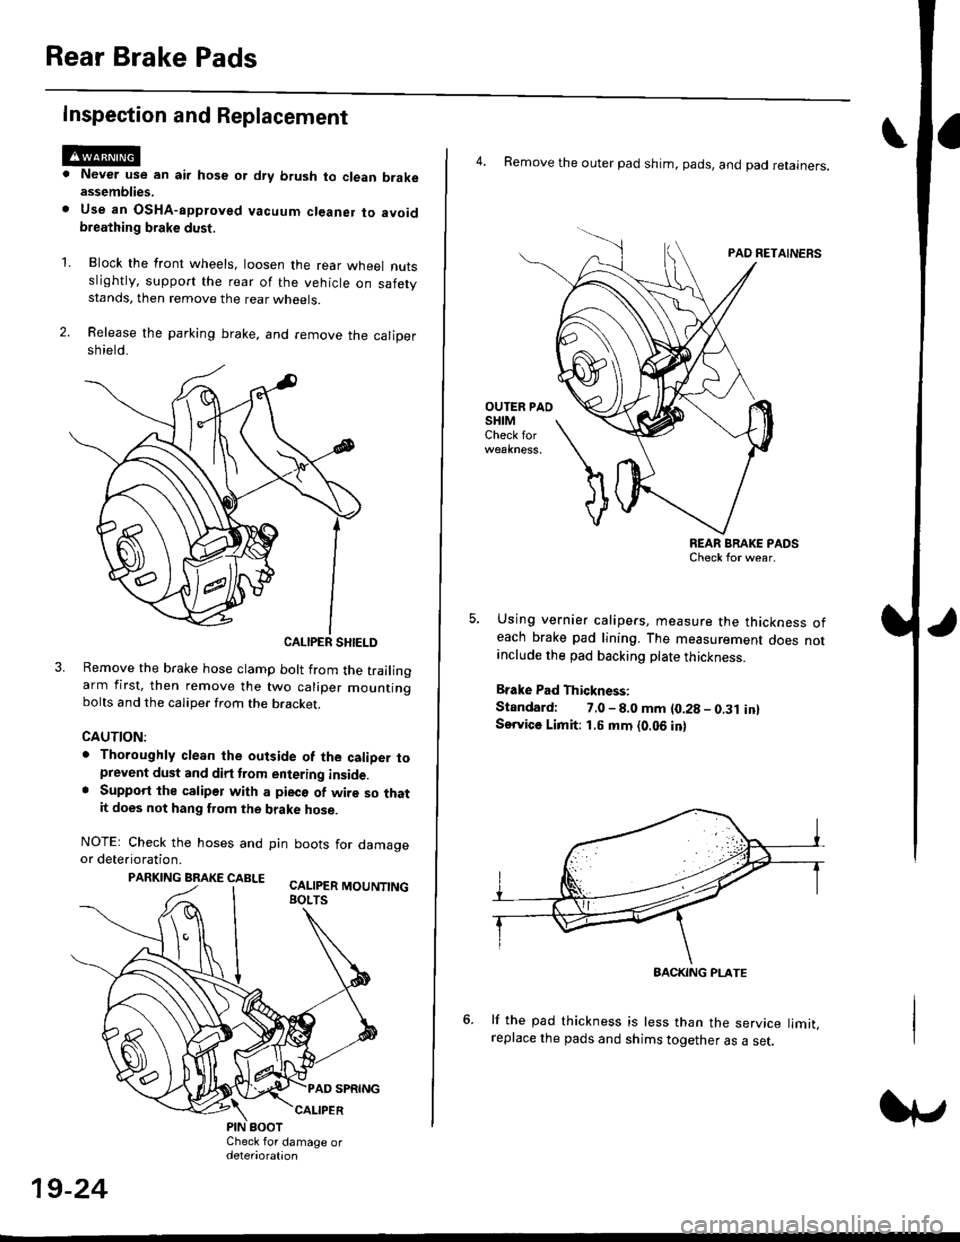 HONDA CIVIC 1996 6.G Owners Guide Rear Brake Pads
Inspection and Replacement
Never use an air hose or dry brush to clean brakeassemblies.
Use an OsHA-apptoved vacuum cl€aner to avoidbreathing brake dust,
Block the front wheels, loos